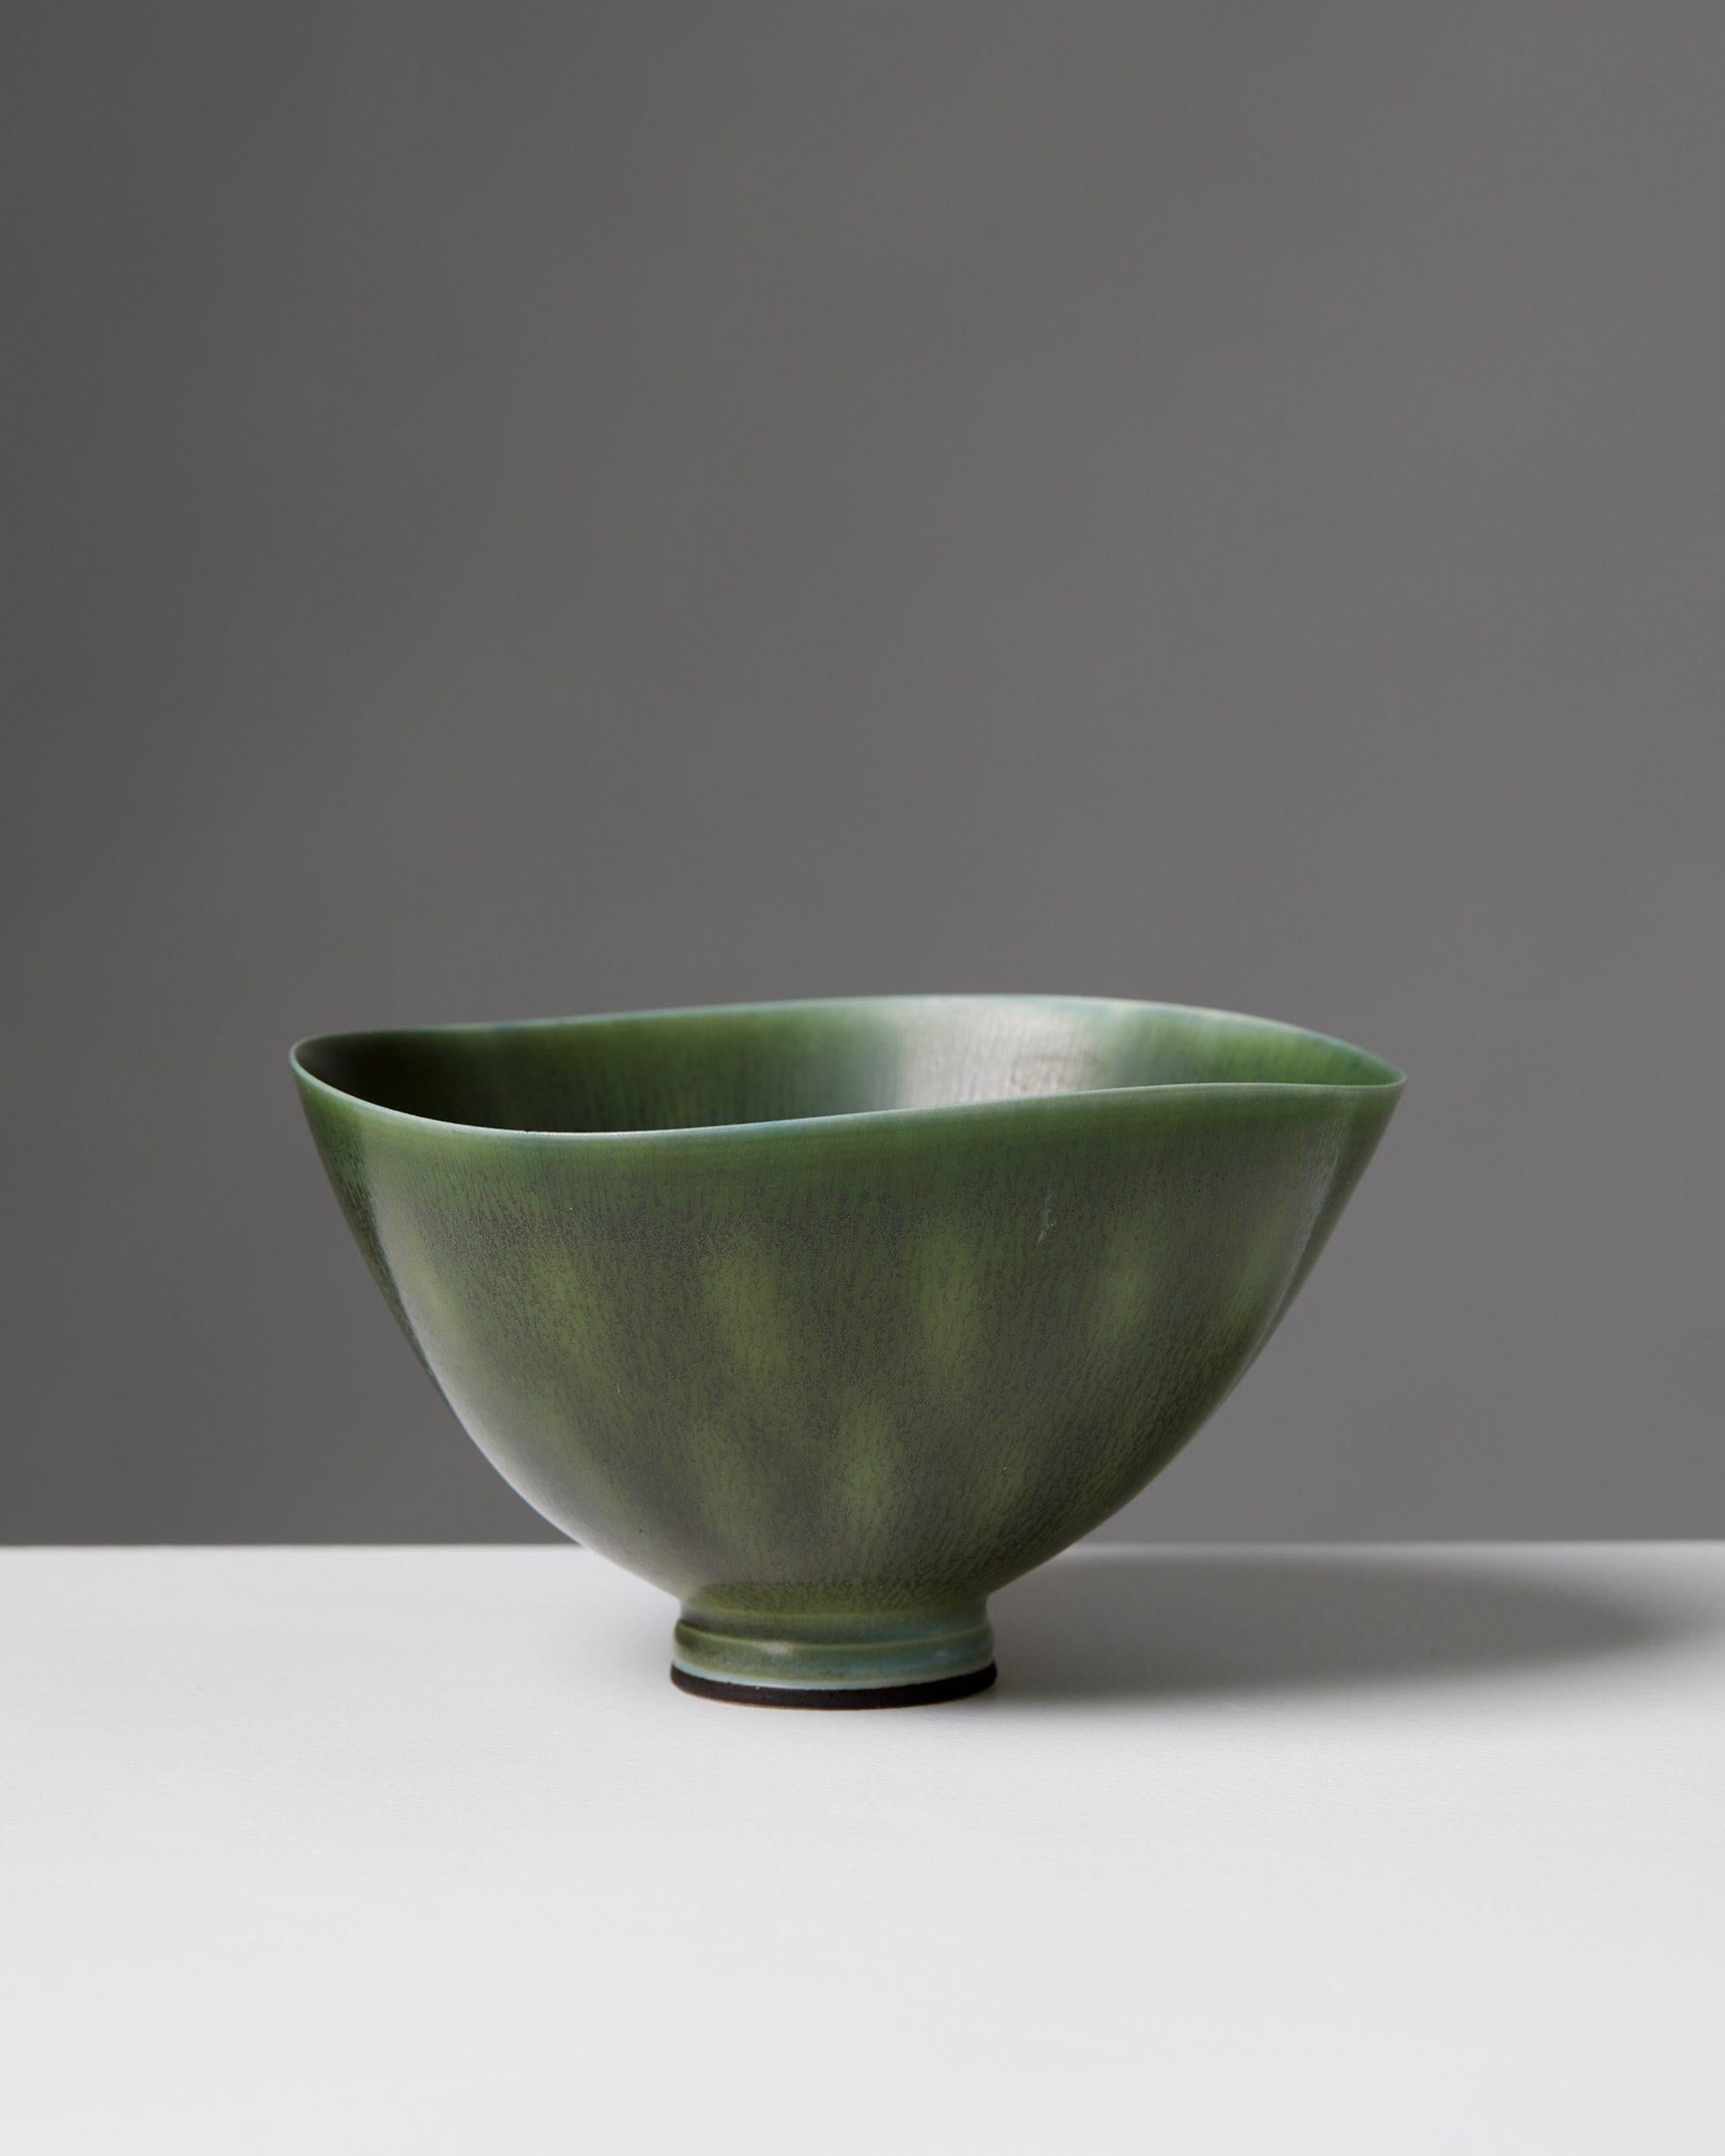 Bowl by Berndt Friberg for Gustavsberg,
Sweden, 1955.

Stoneware.

Berndt Friberg was born in the southern Sweden town of Hoganas. He came from a long line of ceramists, in an area steeped in the tradition of finely crafted pottery. Berndt started